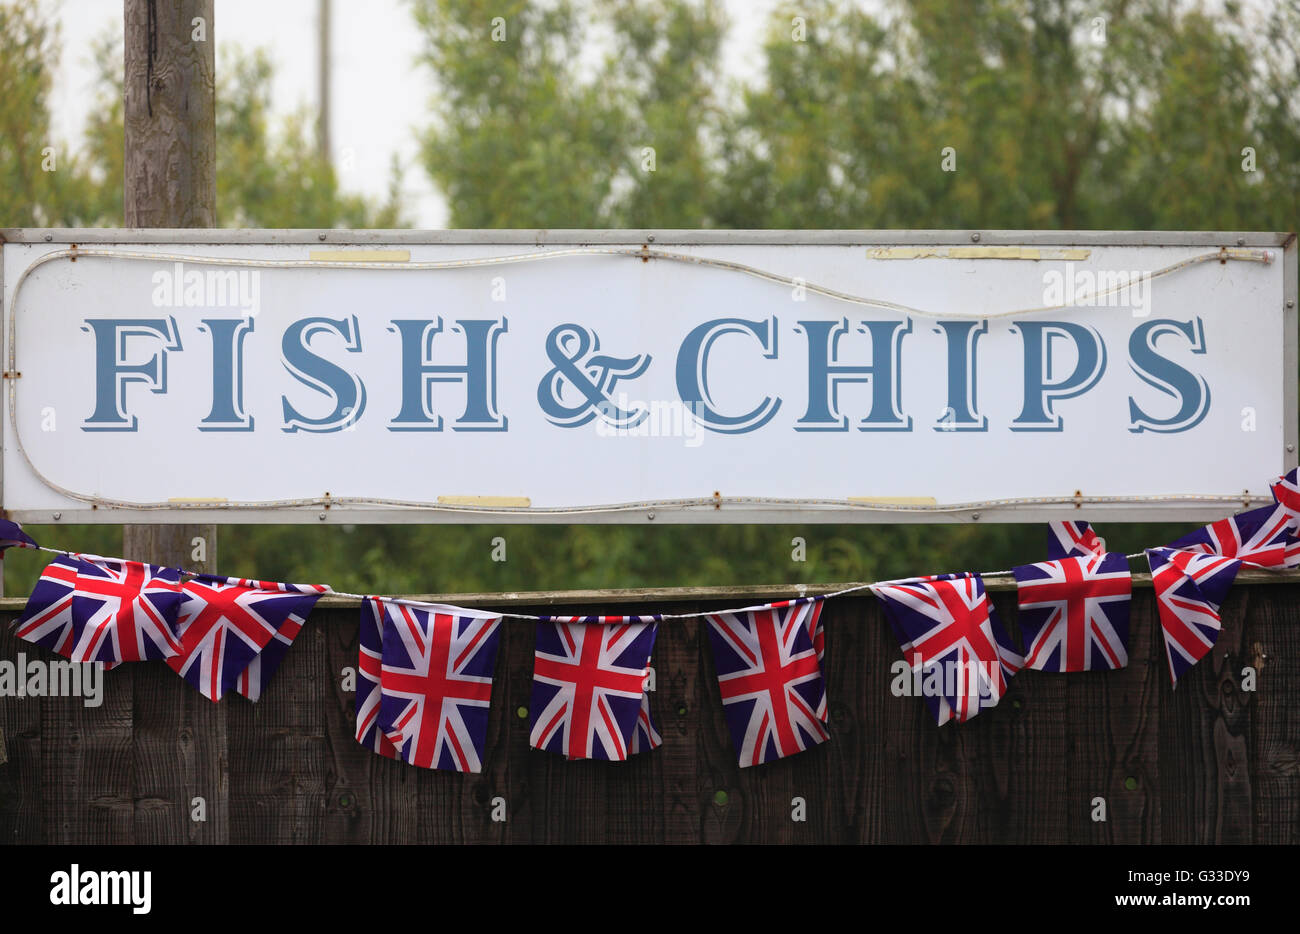 Fish and chips sign with union jack bunting. Stock Photo